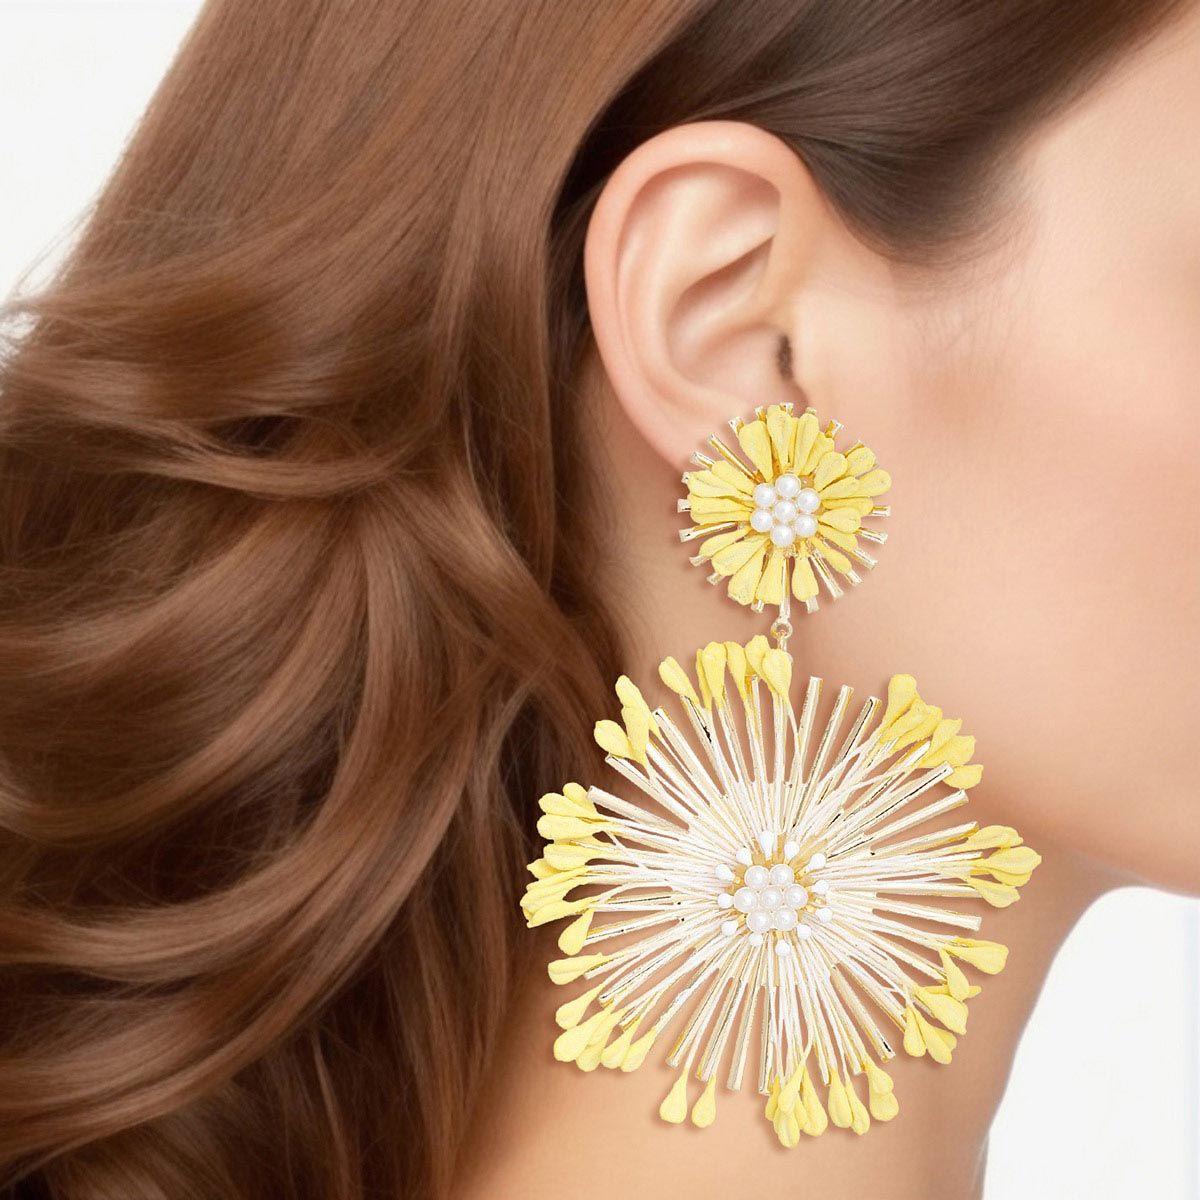 Why You'll Love Our Yellow Flower Dangle Earrings – Find Out!